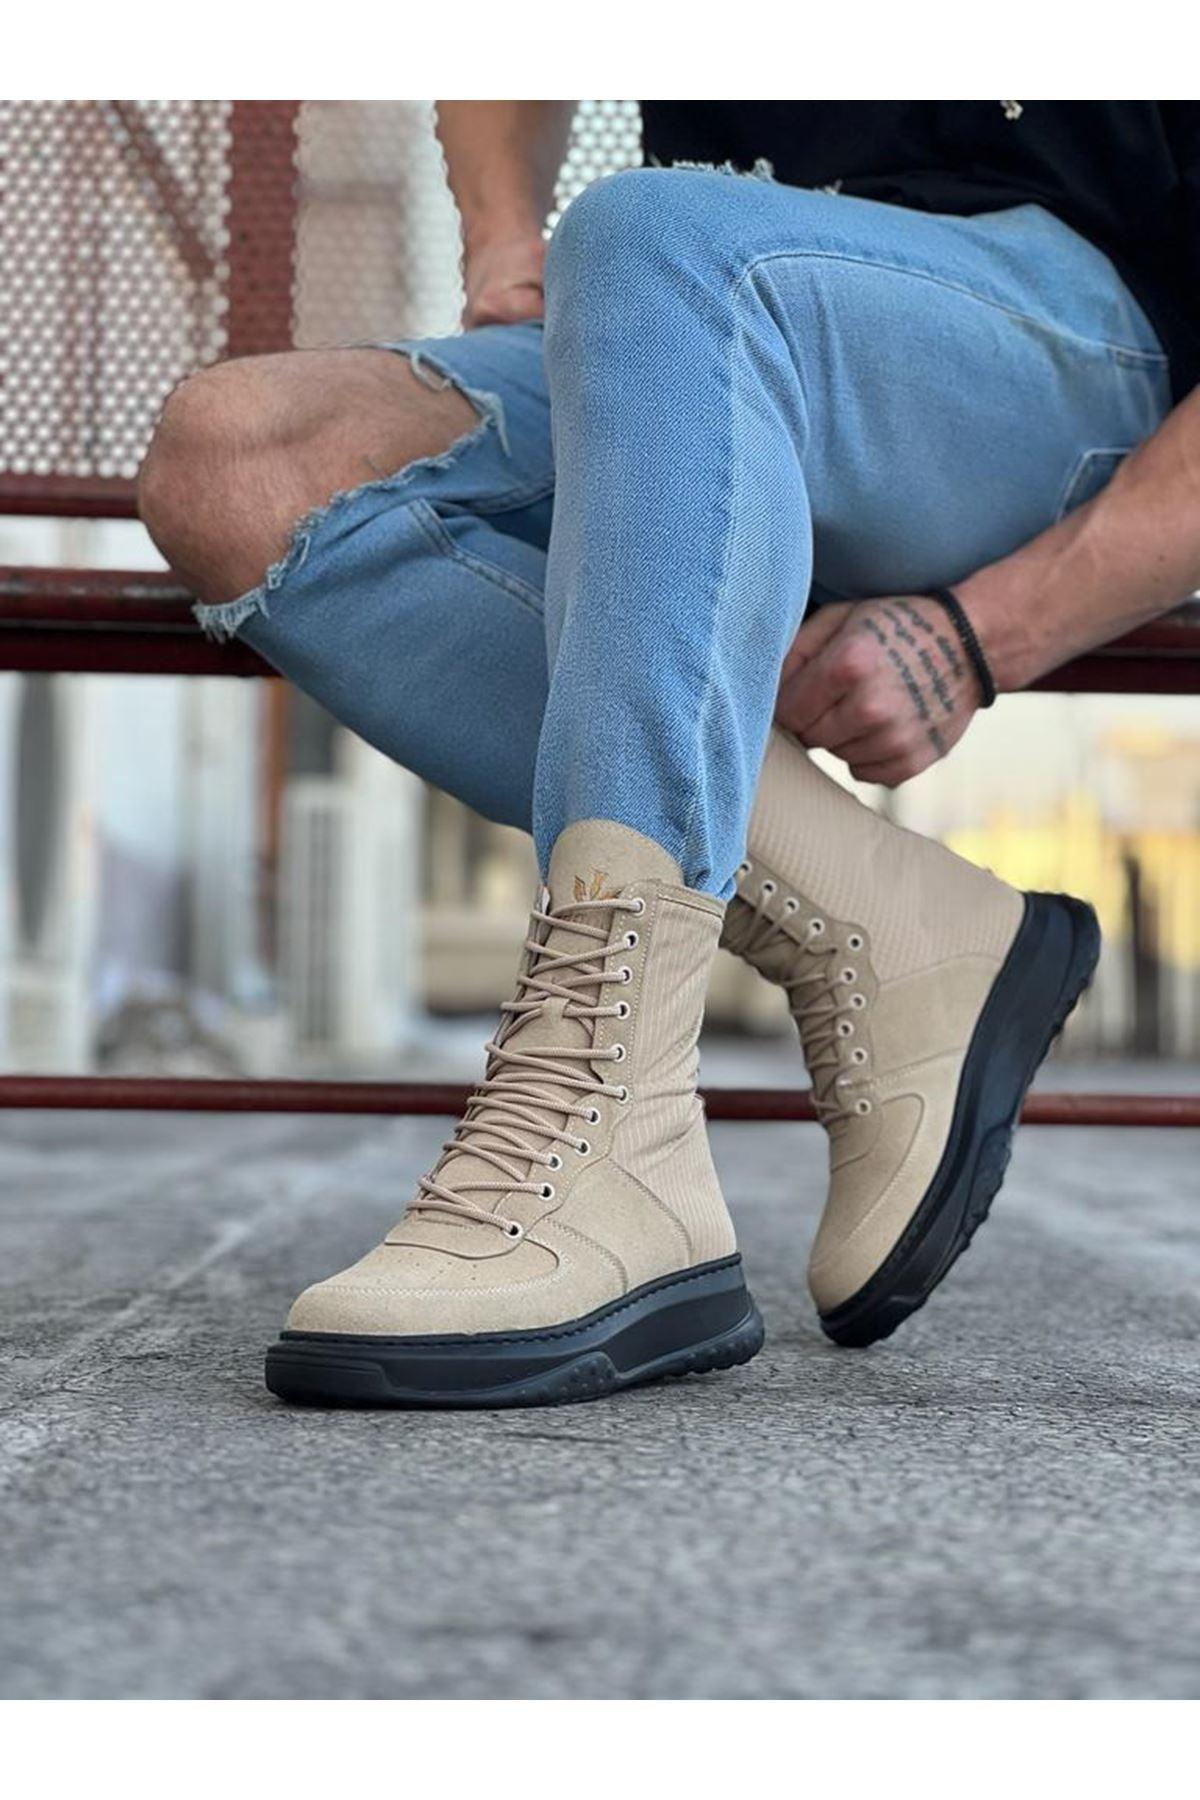 WG012 Men's Beige Charcoal Suede Leather Long Lace-Up Boots - STREET MODE ™